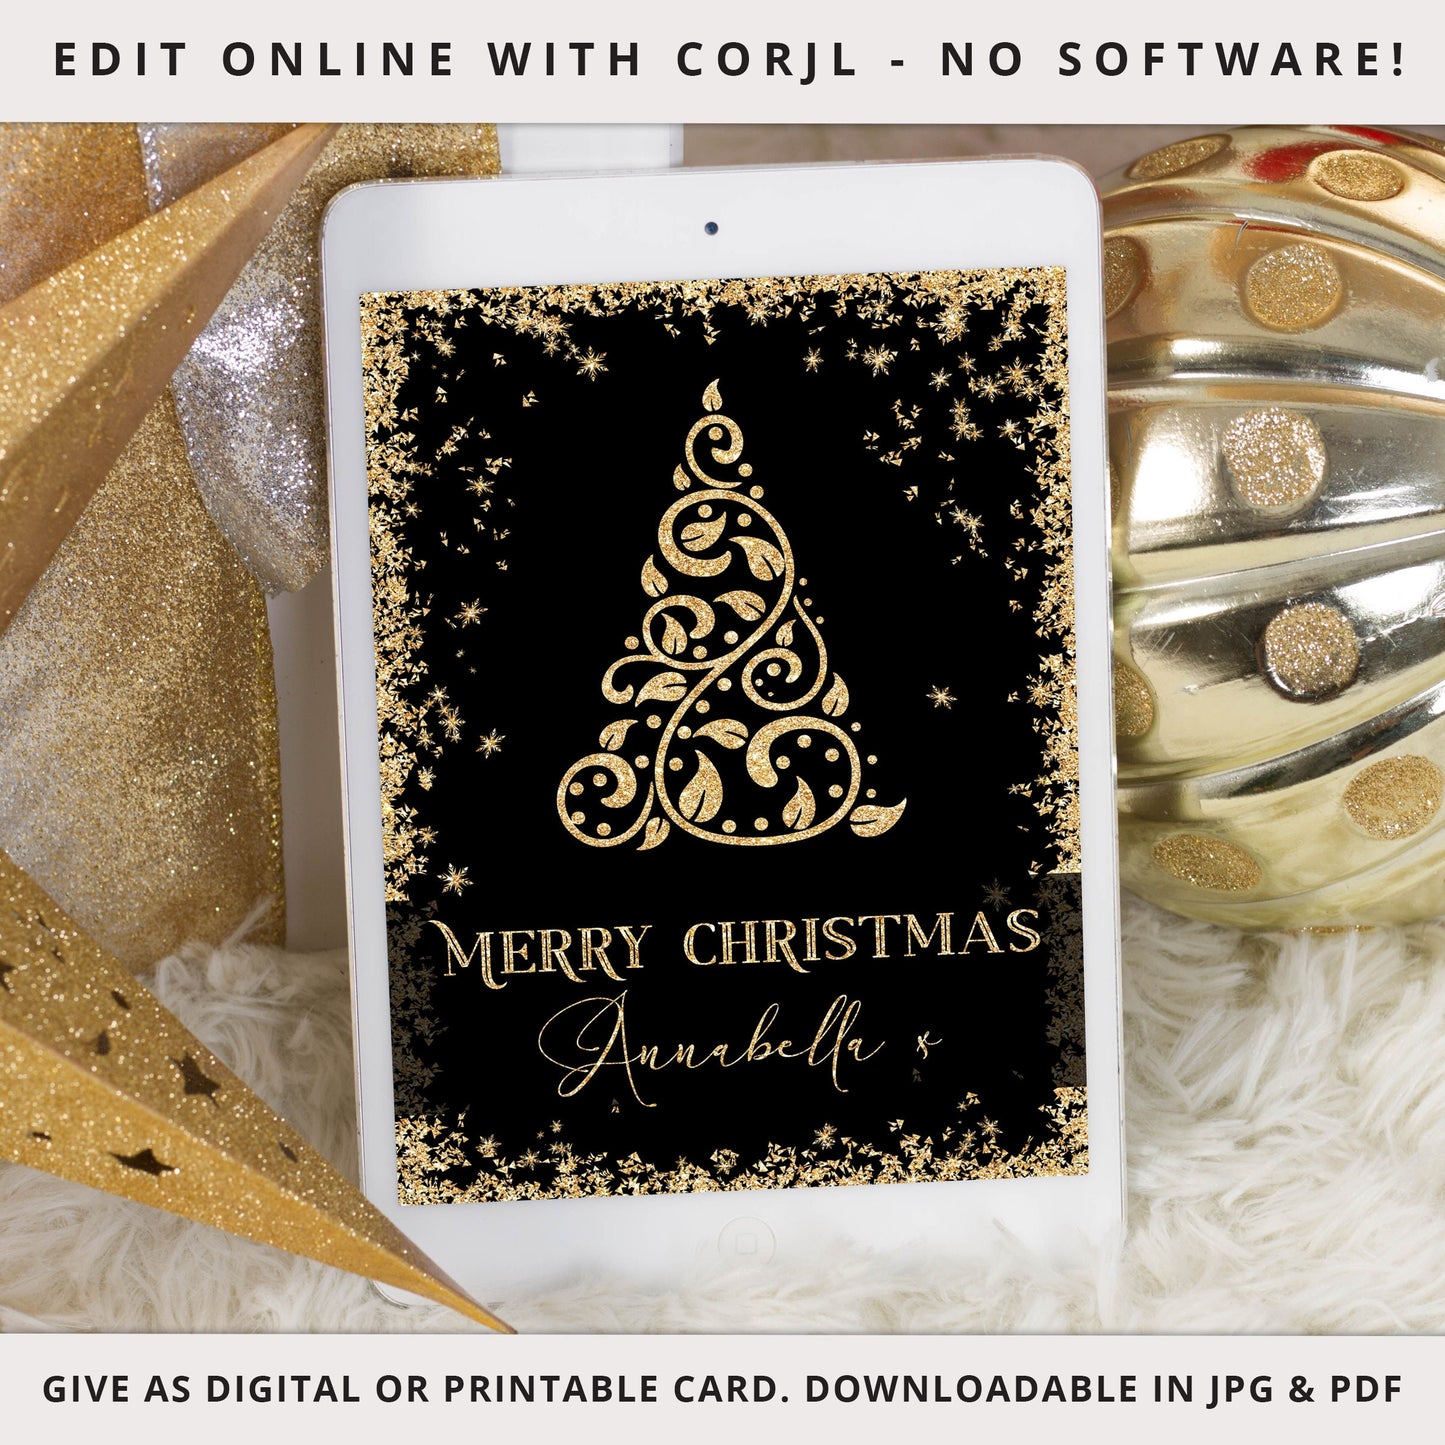 PERSONALISED Christmas Card 5 x 7" INSTANT Download DIY Editable Digital Printable Card - One-Sided Email Christmas Greeting Image - PR0555